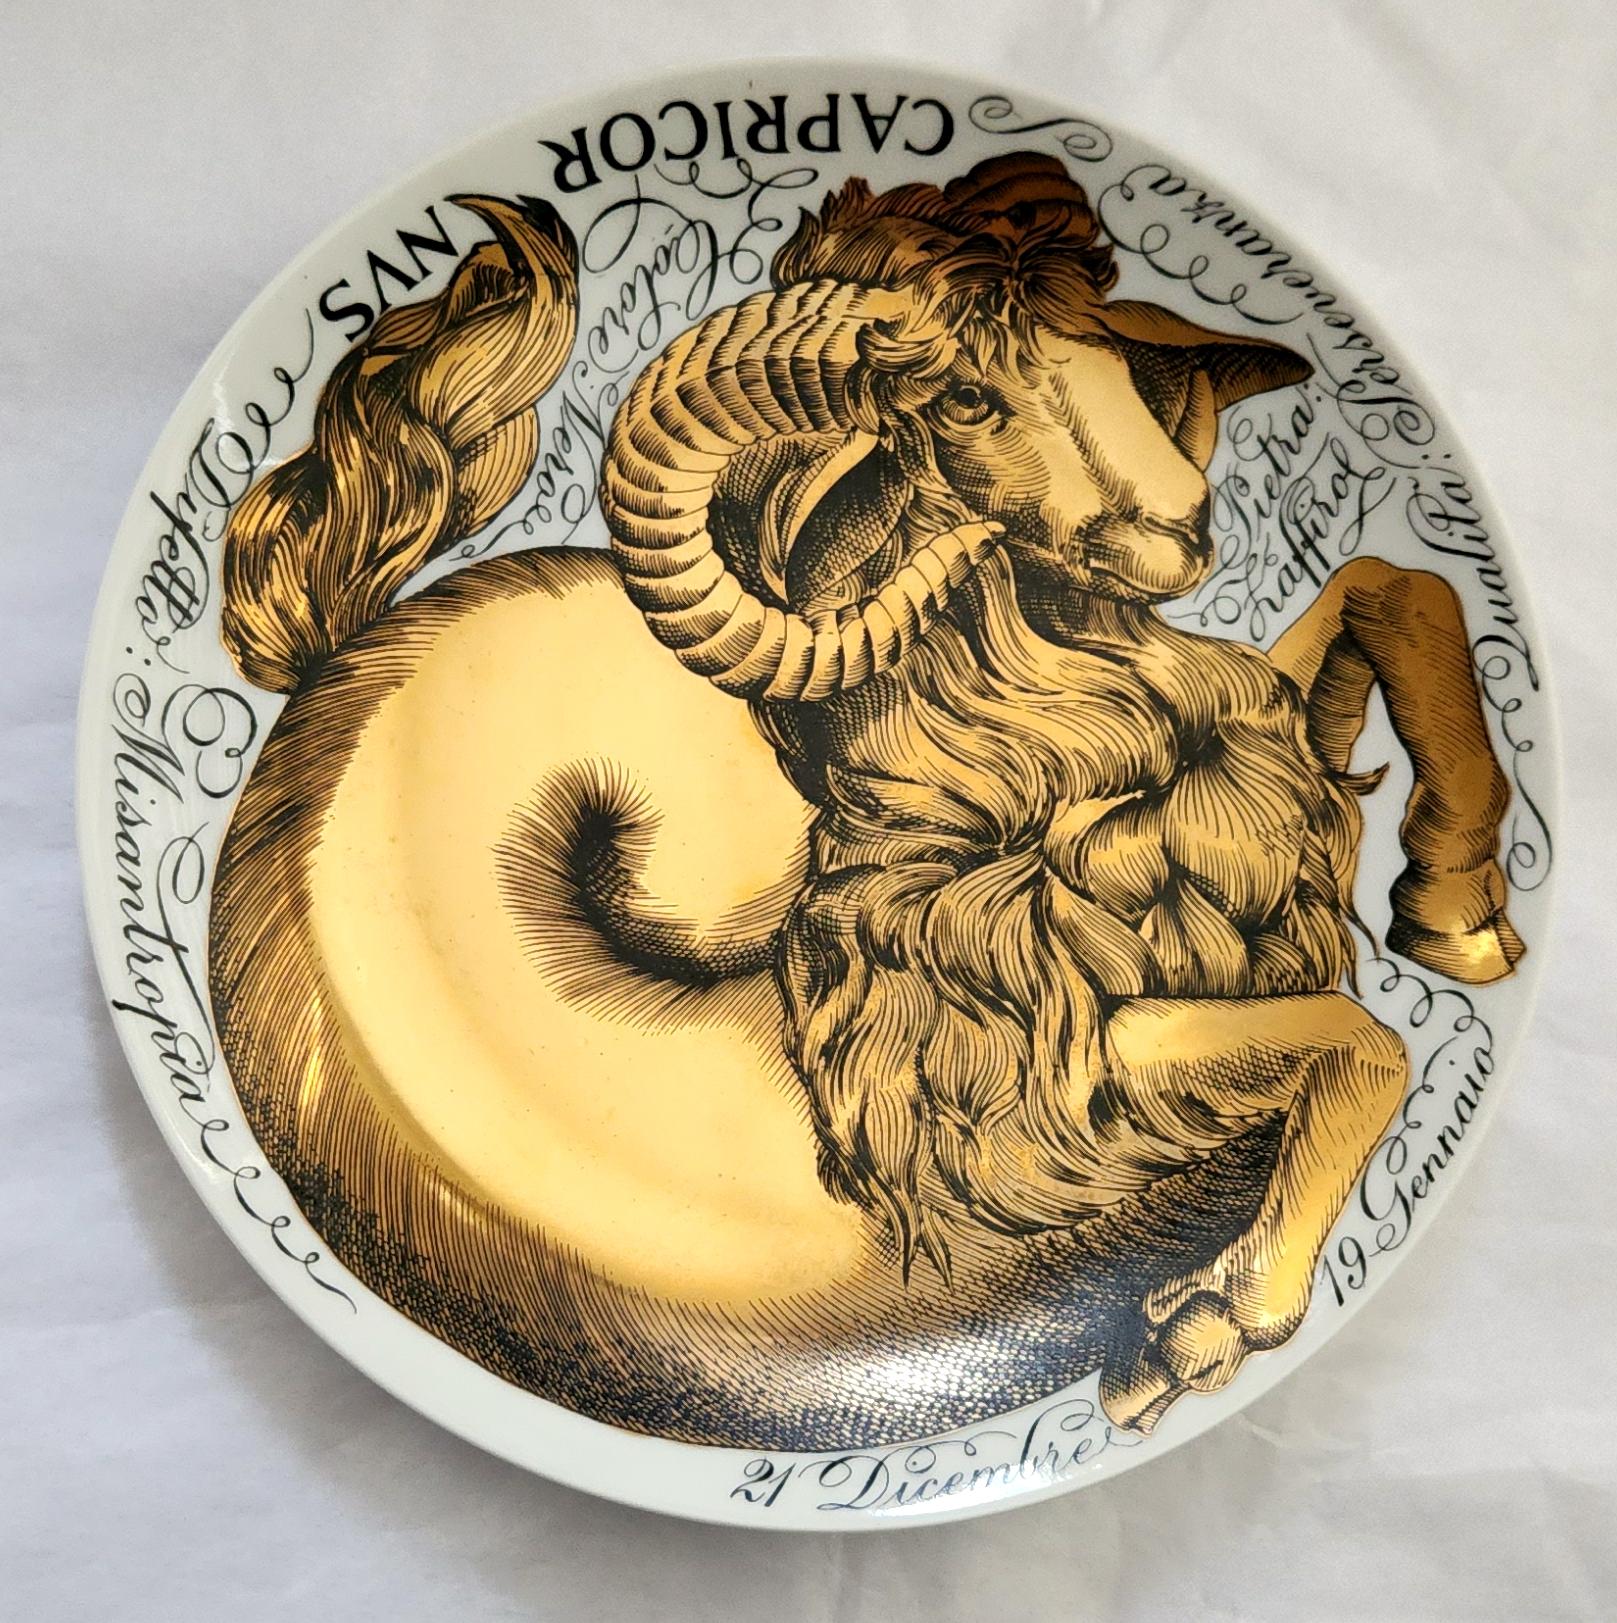 Piero Fornasetti Zodiac Porcelain Plate,
Astrological Sign of Capricorn,
Made for Corisia in 1964.

The plate in black and gold depicts the astrological sign Capricorn with words, intertwined around the form of a ram, with characteristics of the